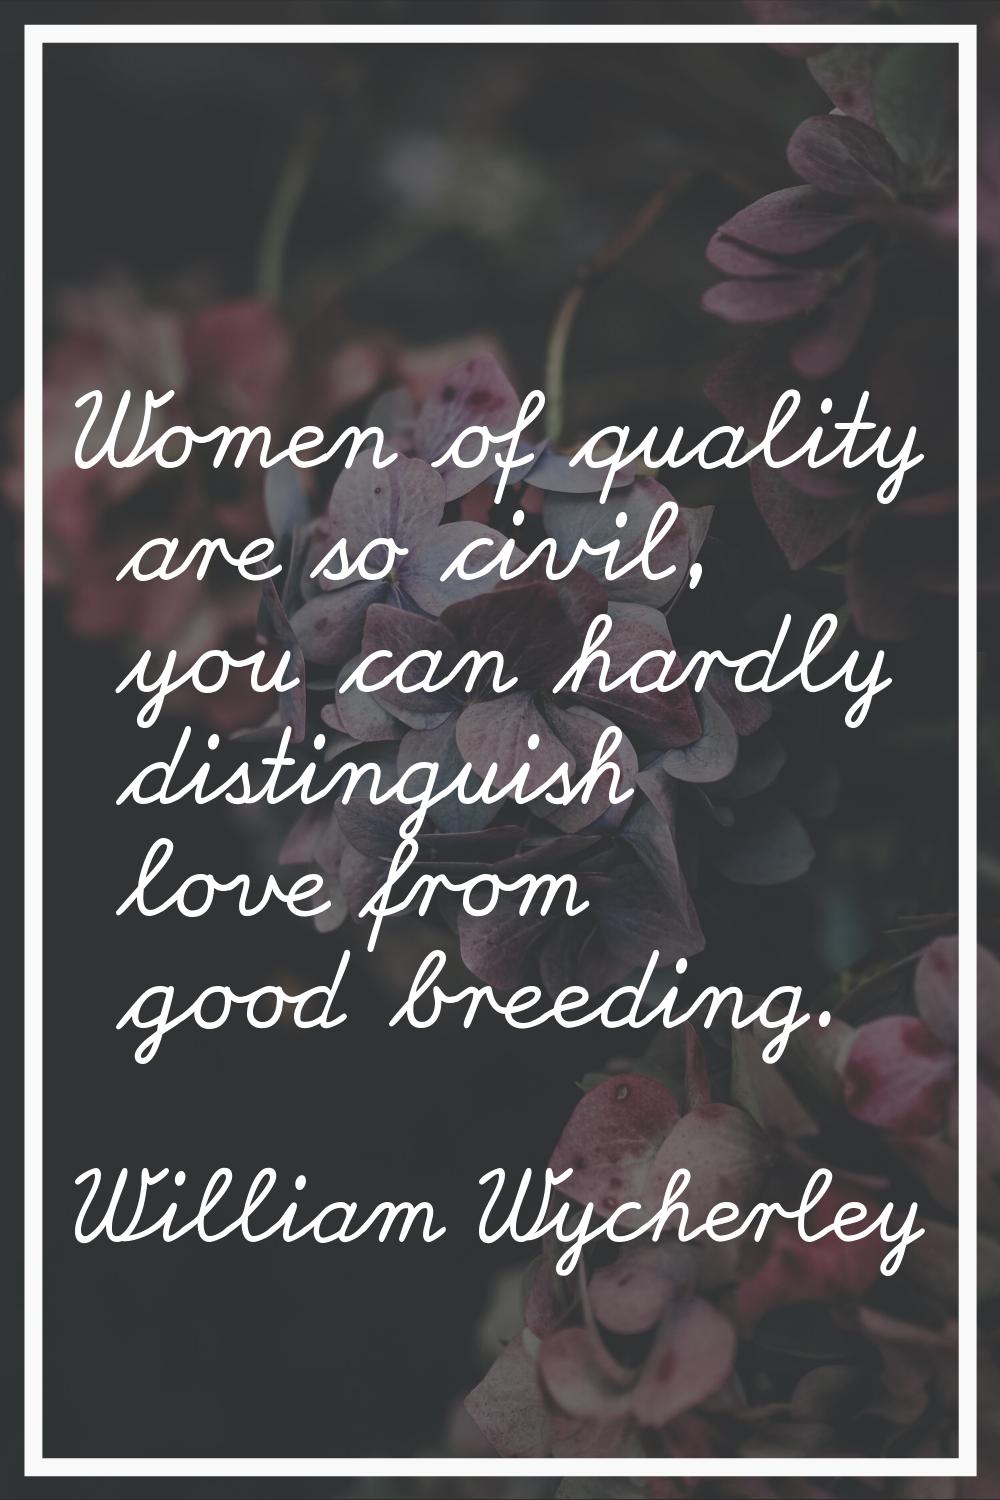 Women of quality are so civil, you can hardly distinguish love from good breeding.